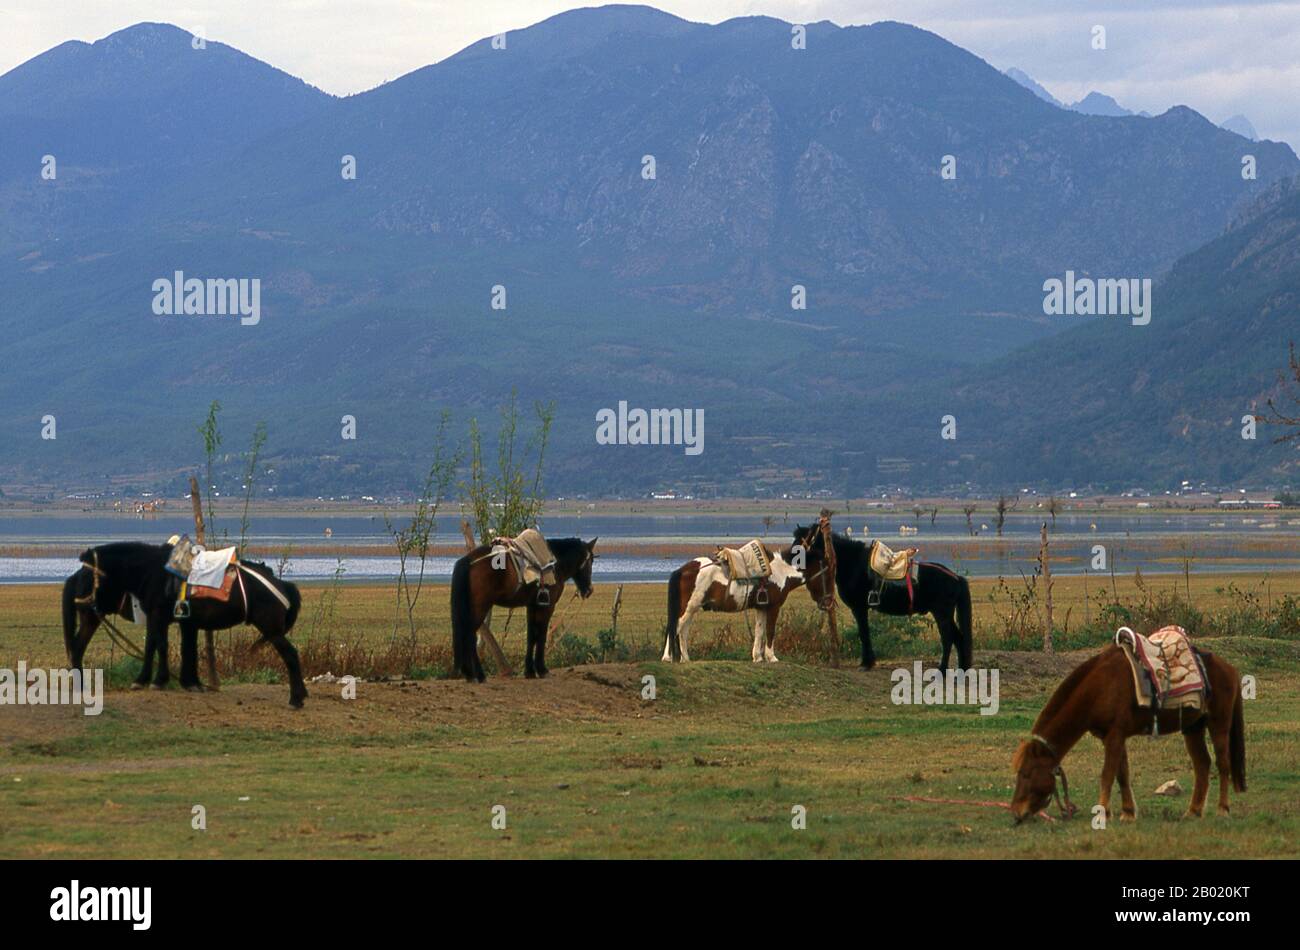 Lashi Lake (Lashihai) at an elevation of 2500 metres (8,200 ft) is the largest highland lake in Lijiang County, Yunnan Province. As many as 57 migratory bird species use the lake including whooper swans and black-necked crane. Stock Photo